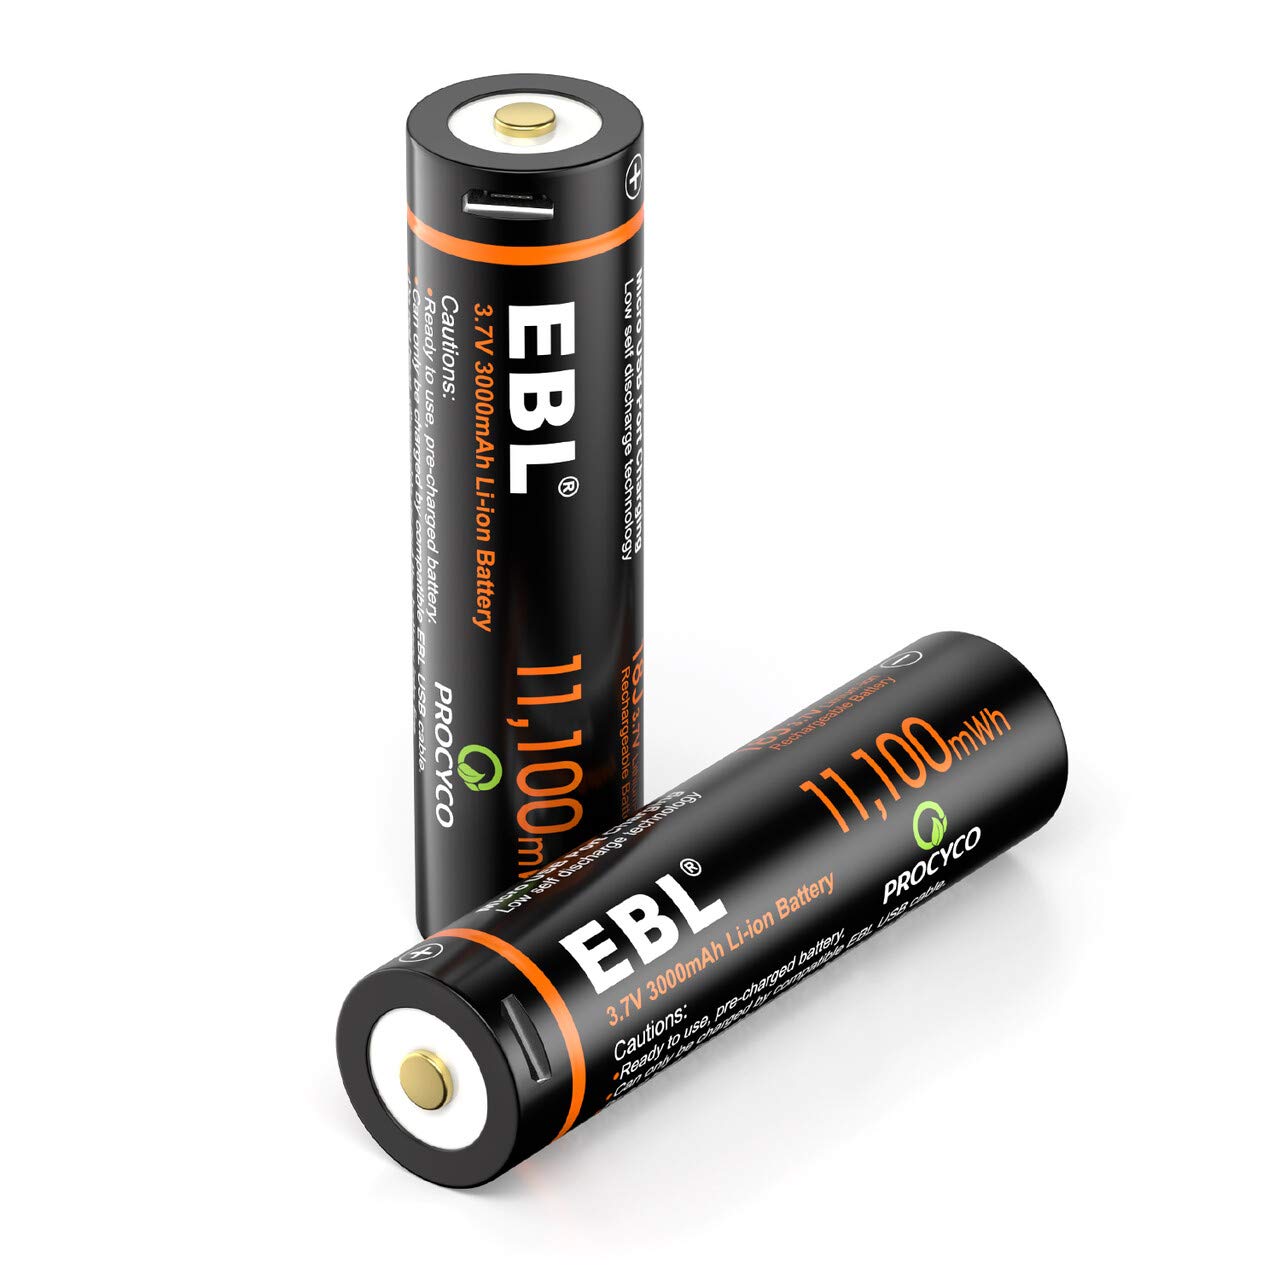 EBL AA Battery 1.5V AA Lithium ion Batteries 3300mWh High Capacity with  Micro USB Cable, 2 Hours Quick Charge USB AA Rechargeable Batteries 4 Packs